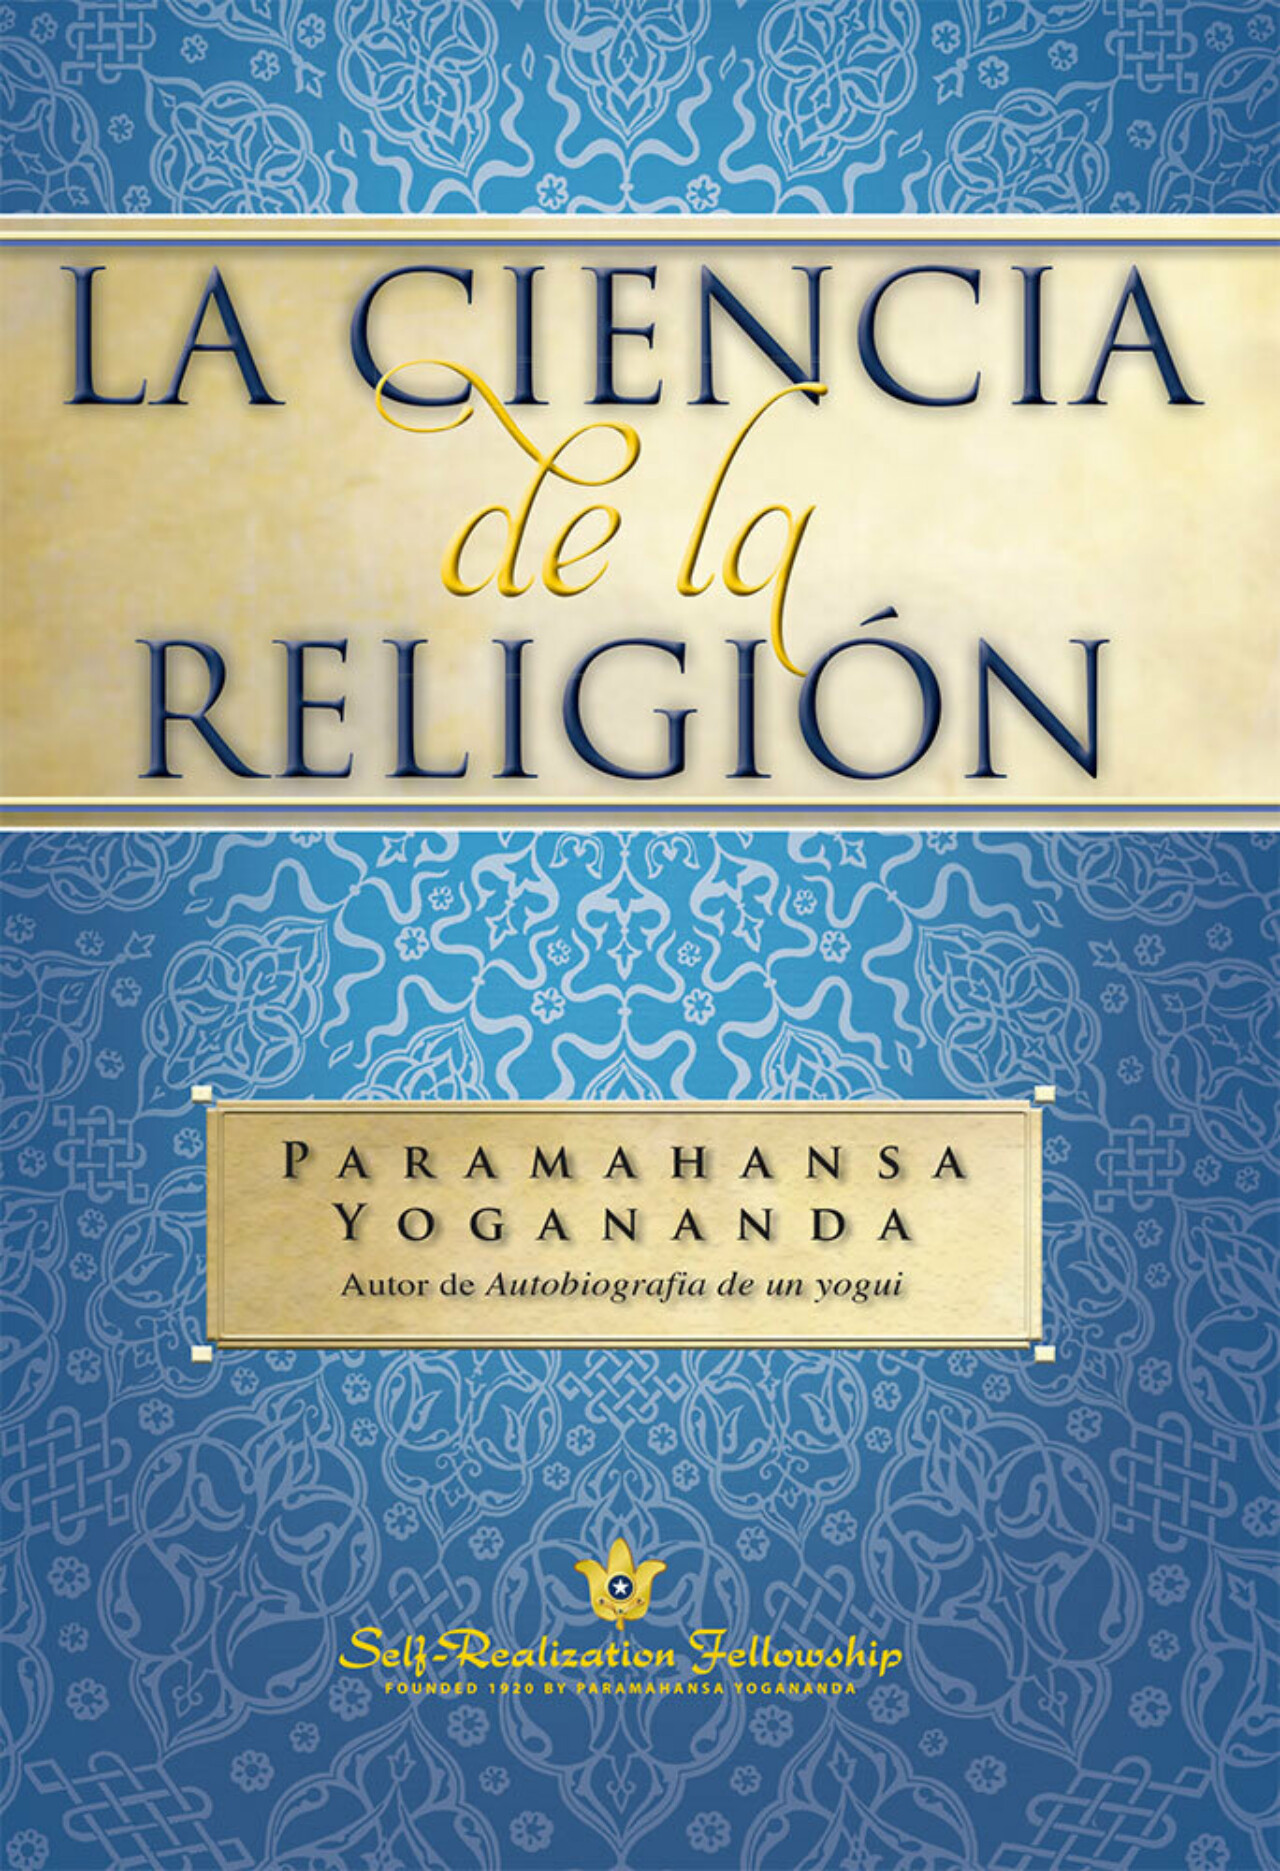 Science of Religion Front Spanish